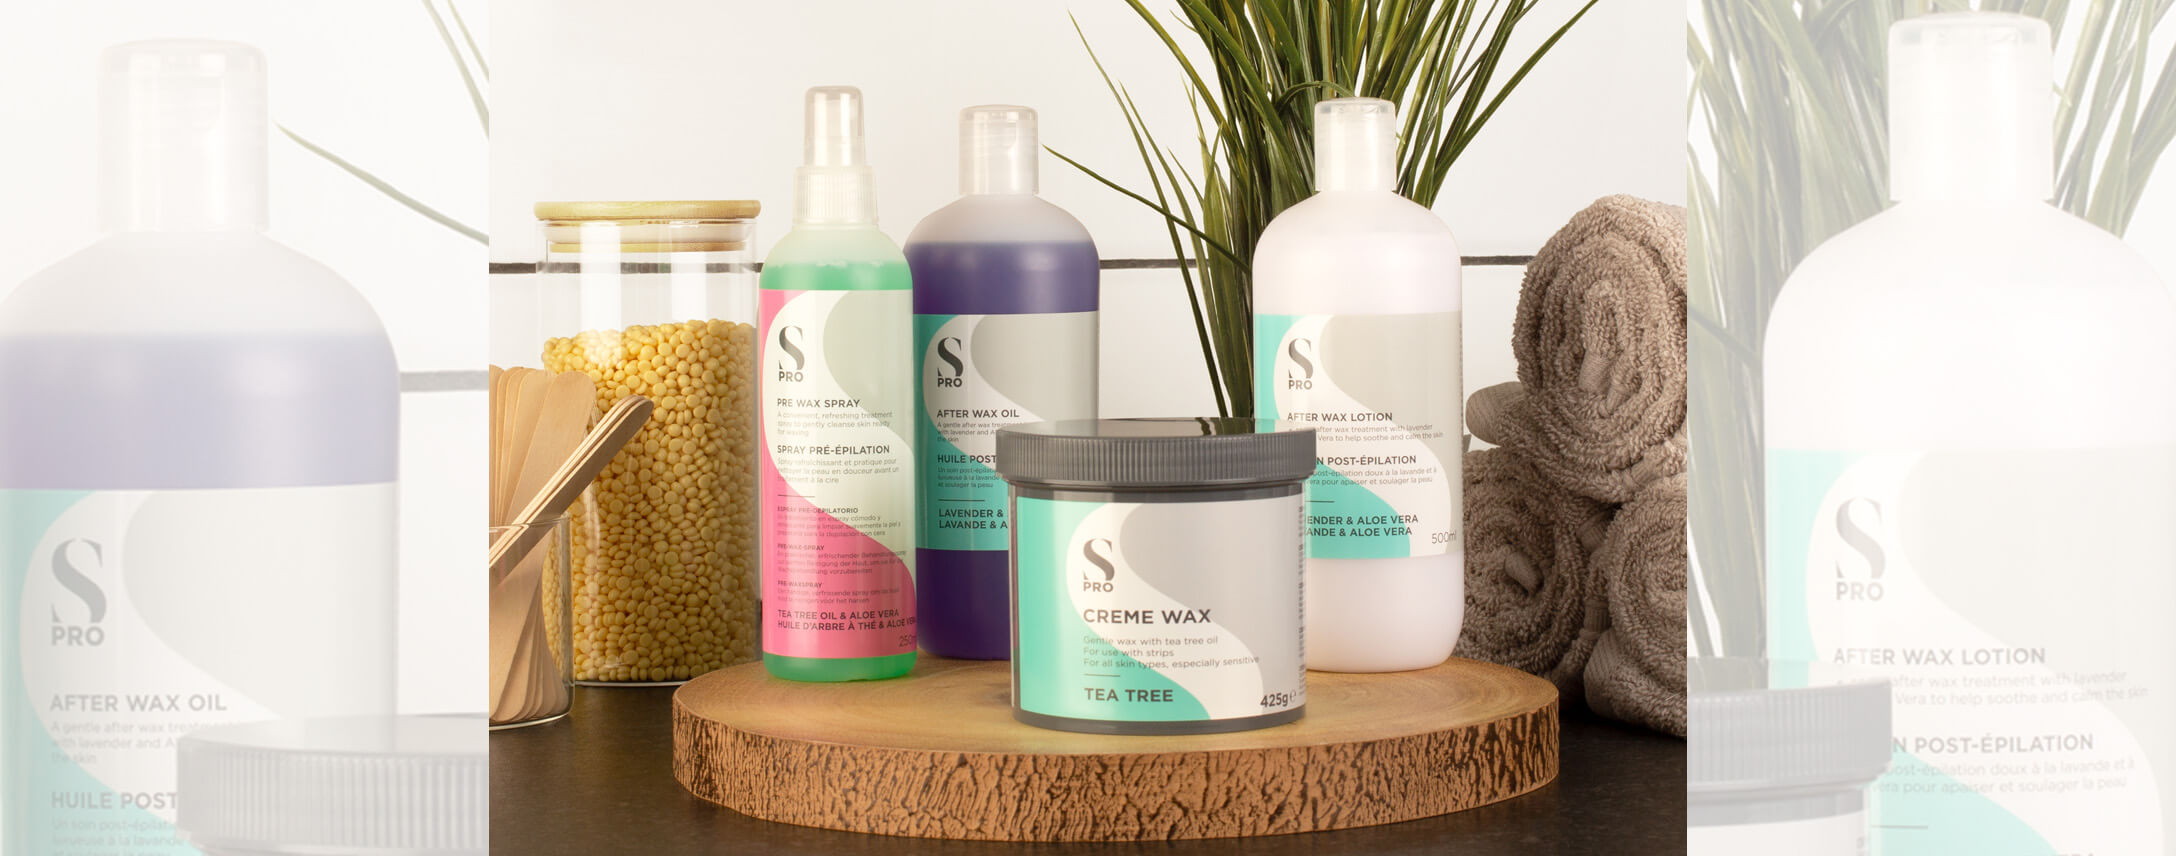 Trust S-PRO: The waxing range for a successful salon